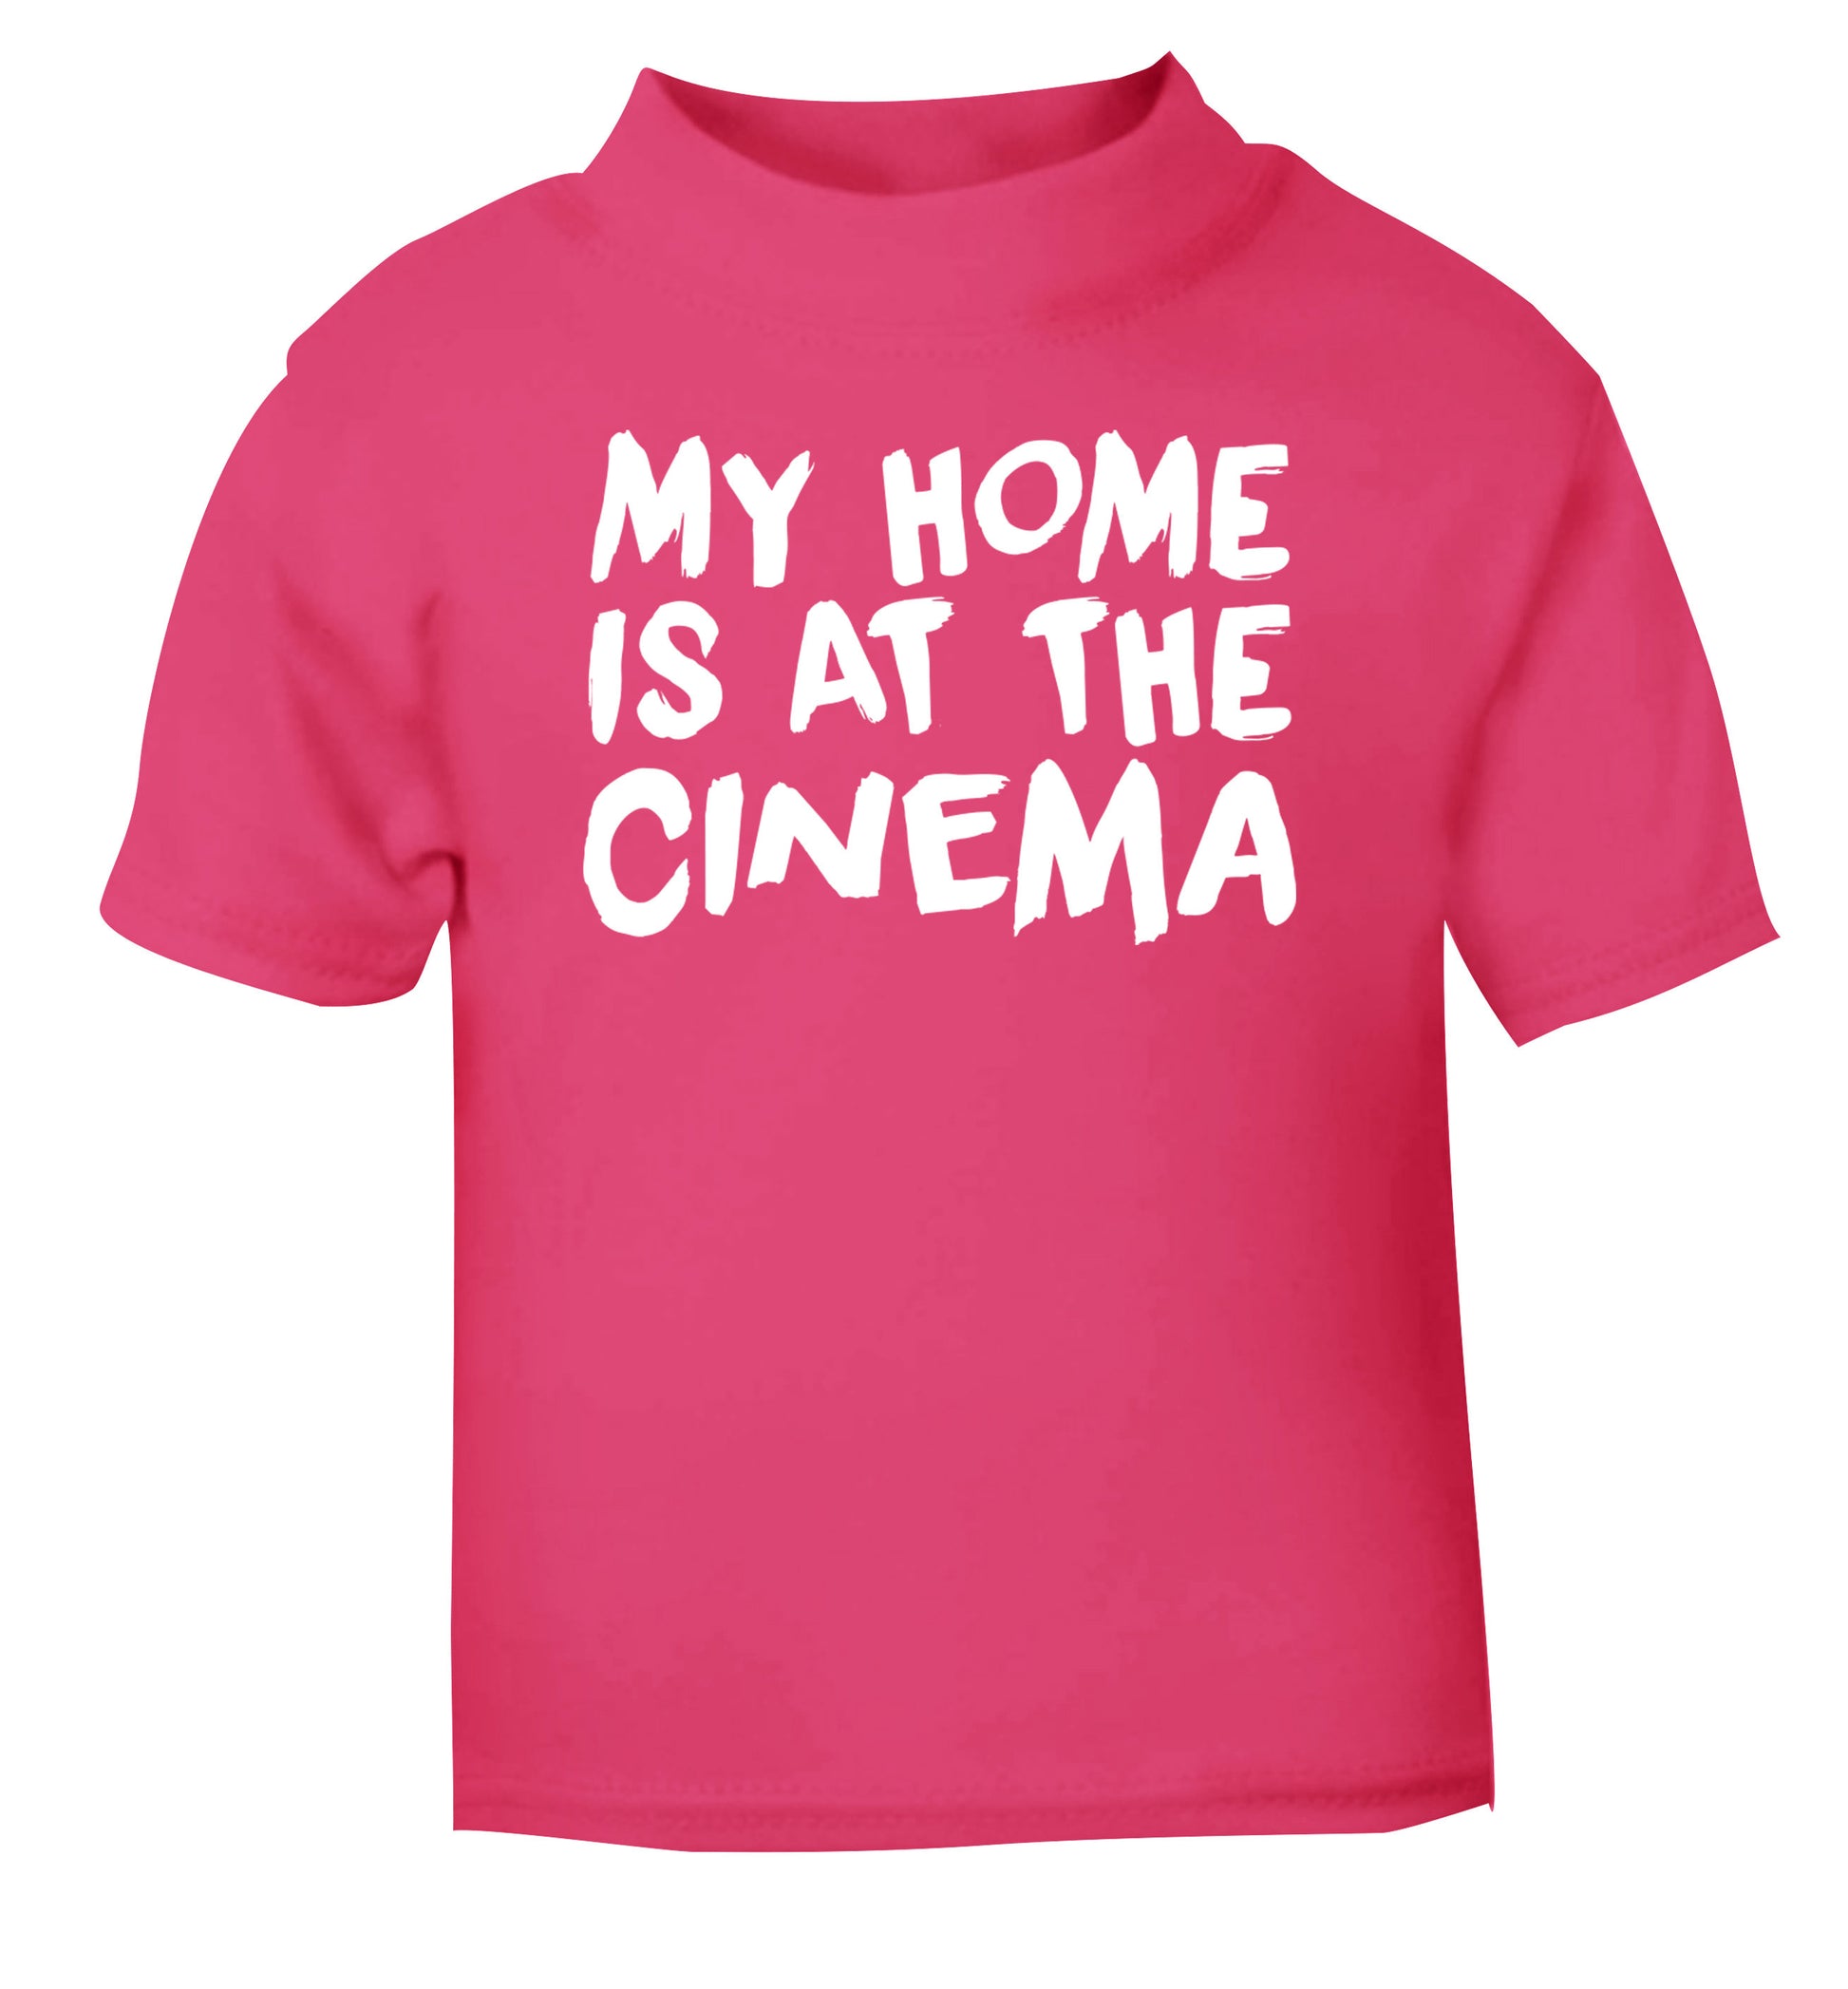 My home is at the cinema pink Baby Toddler Tshirt 2 Years